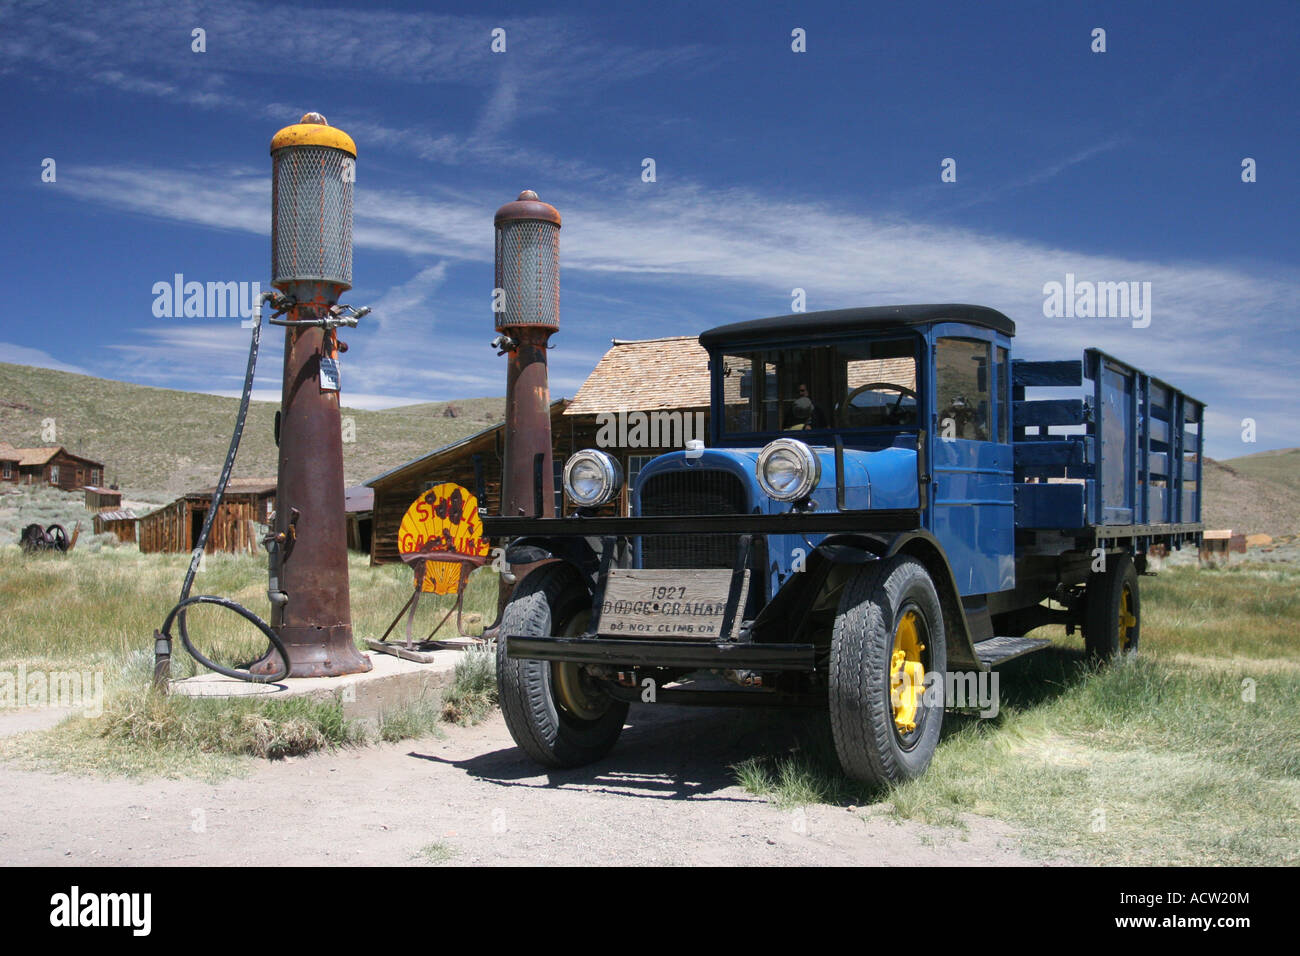 Blue Dodge truck on Main Street, Bodie Ghost Town, California, USA Stock Photo